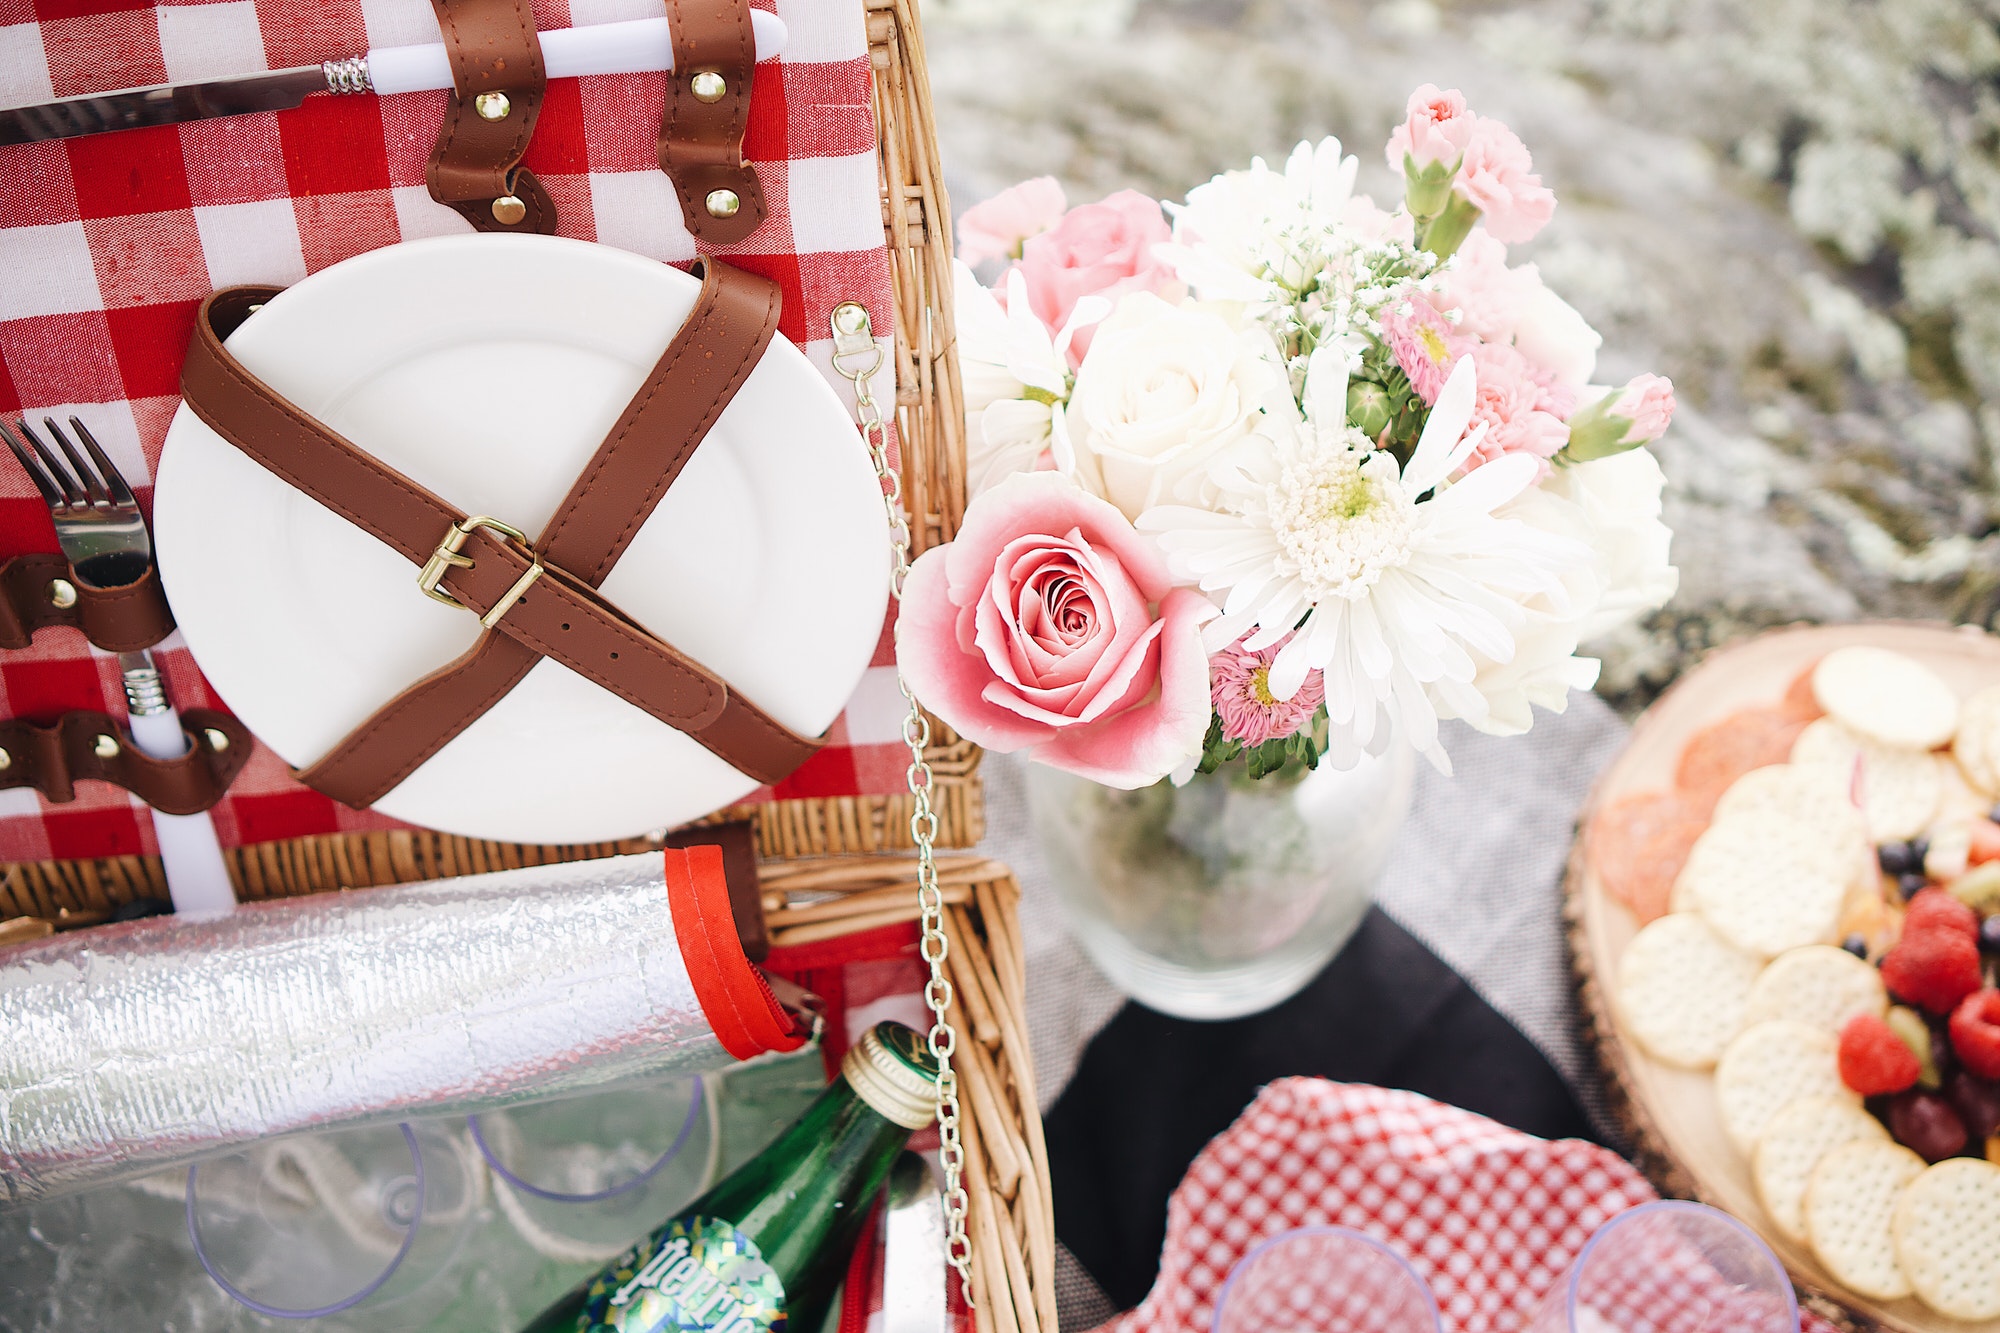 Romantic picnic with flowers and picnic basket